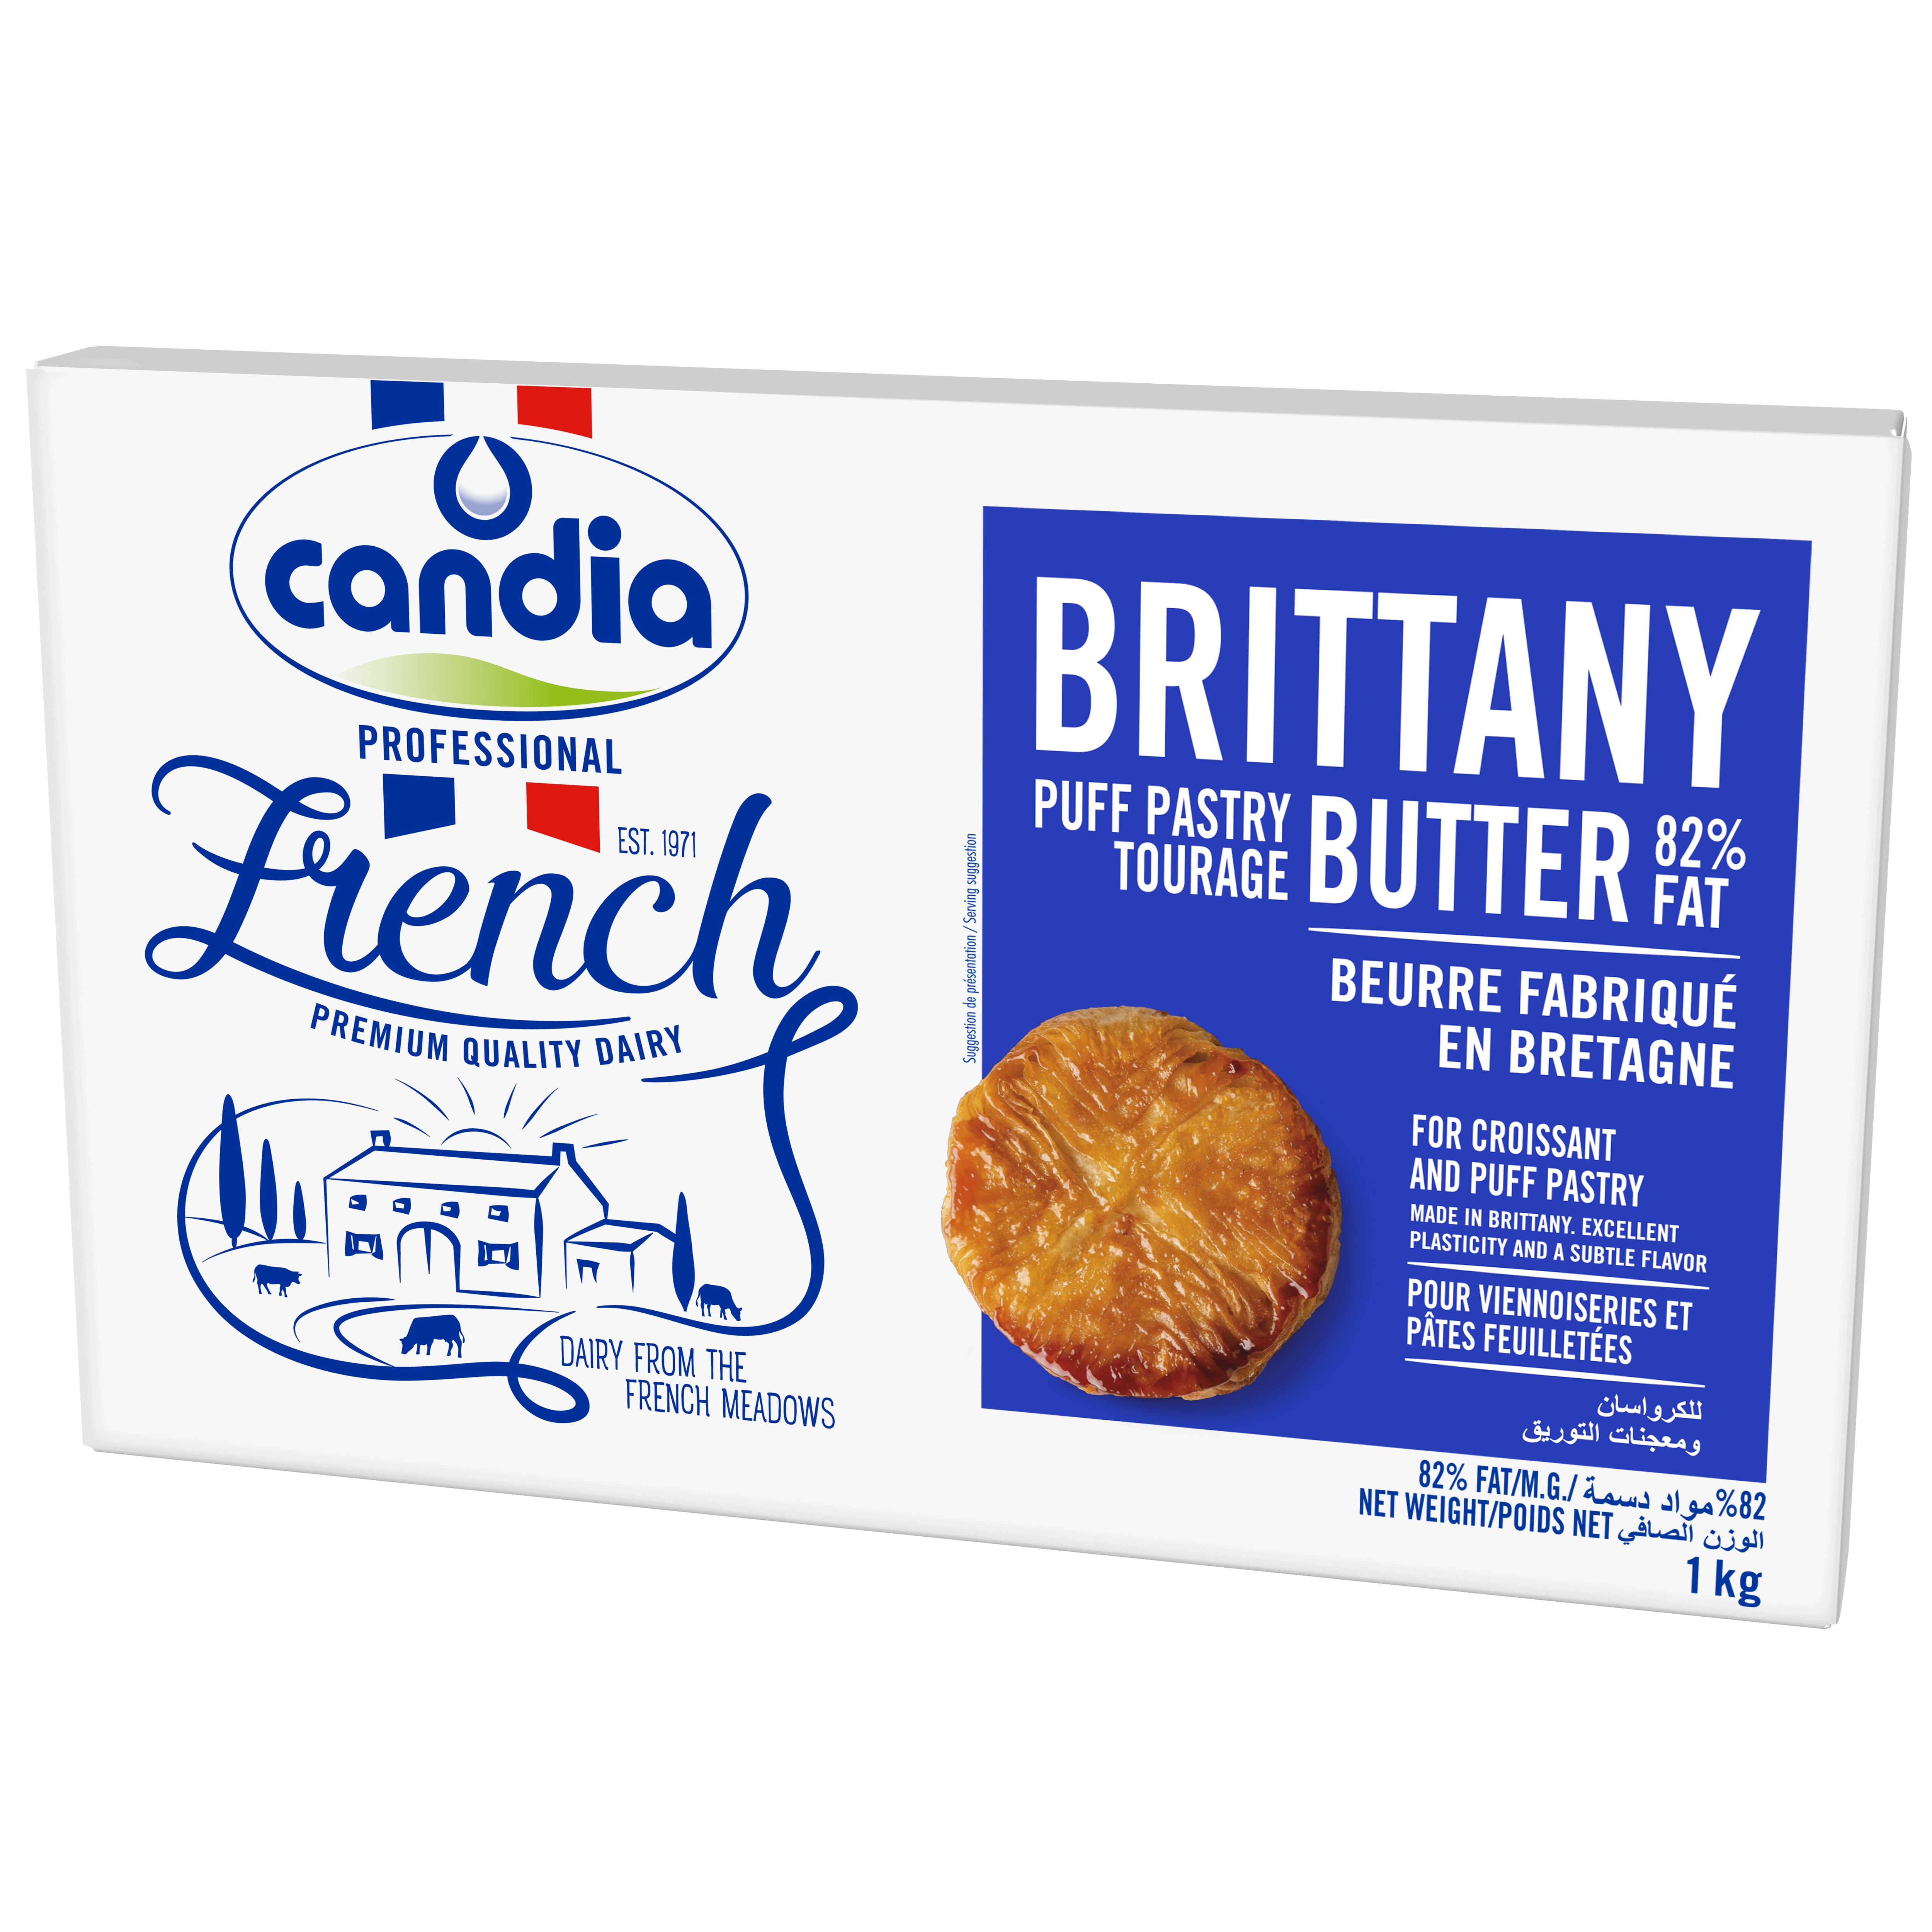 BRITTANY PUFF PASTRY BUTTER